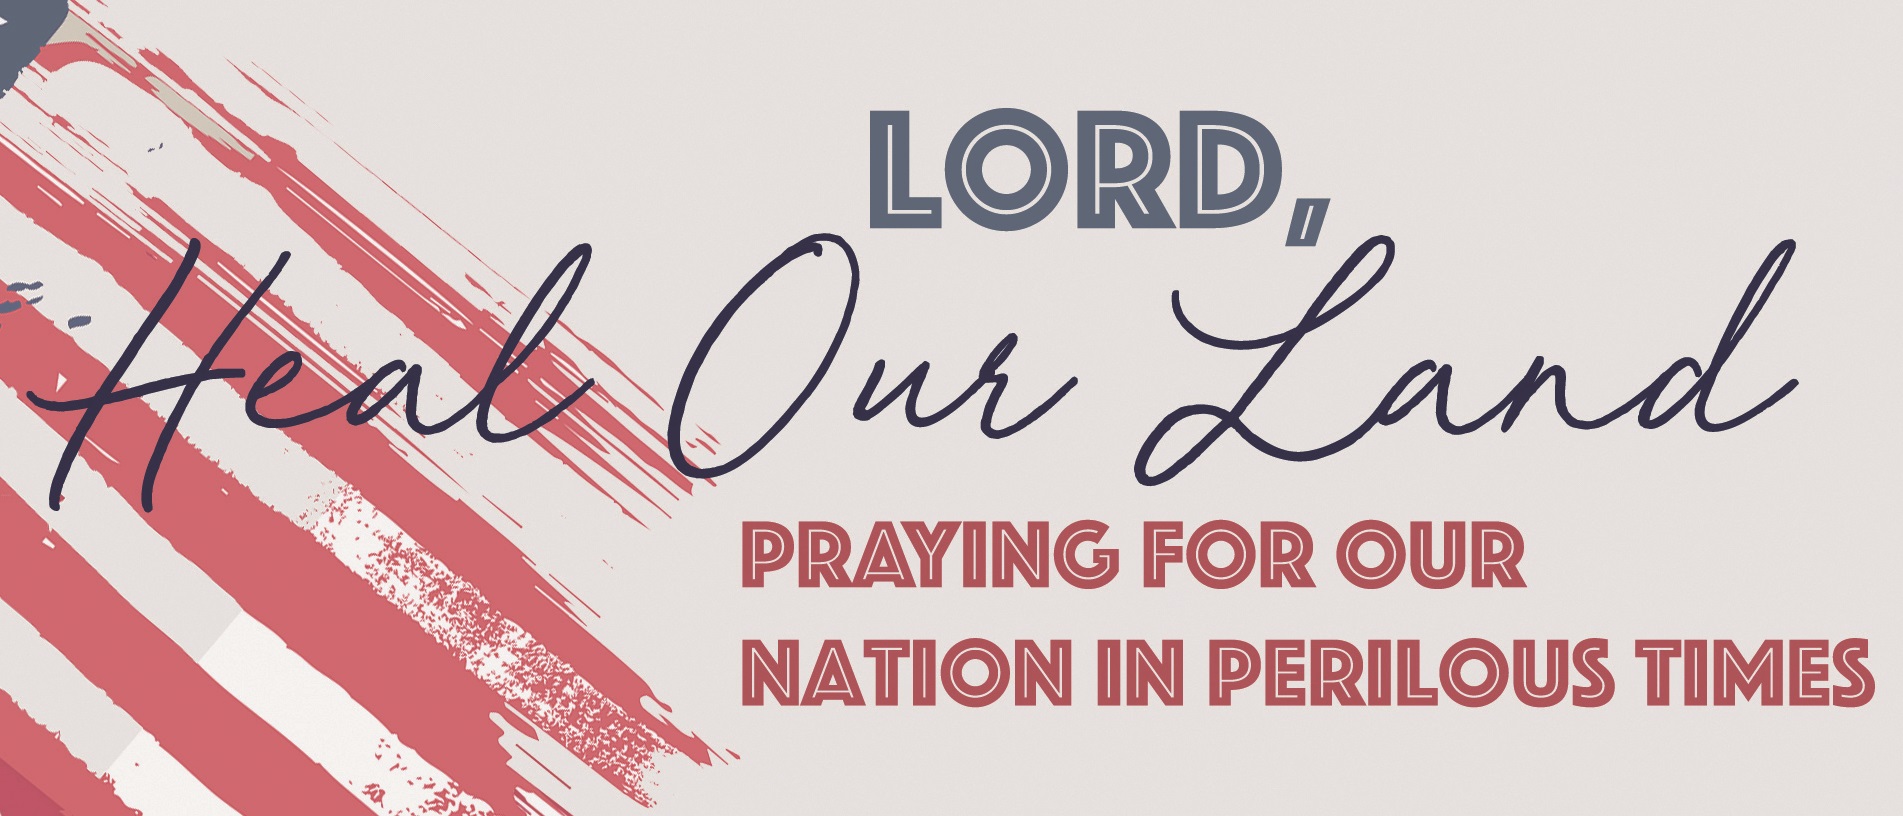 Lord, Heal Our Land, Praying For Our Nation in Perilous Times